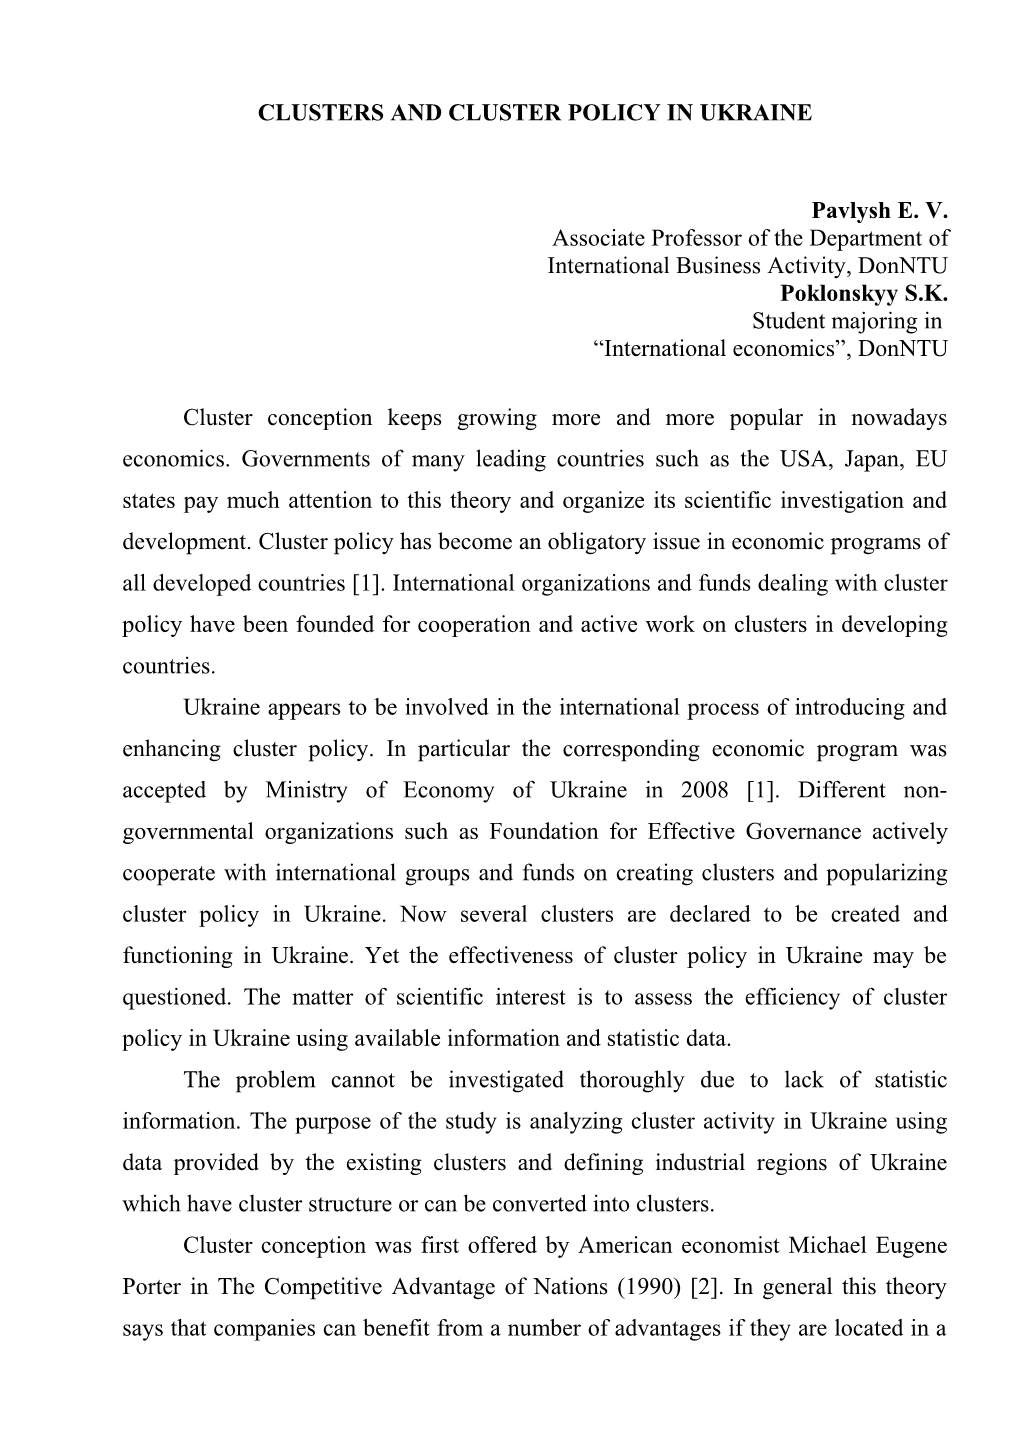 Clusters and Cluster Policy in Ukraine